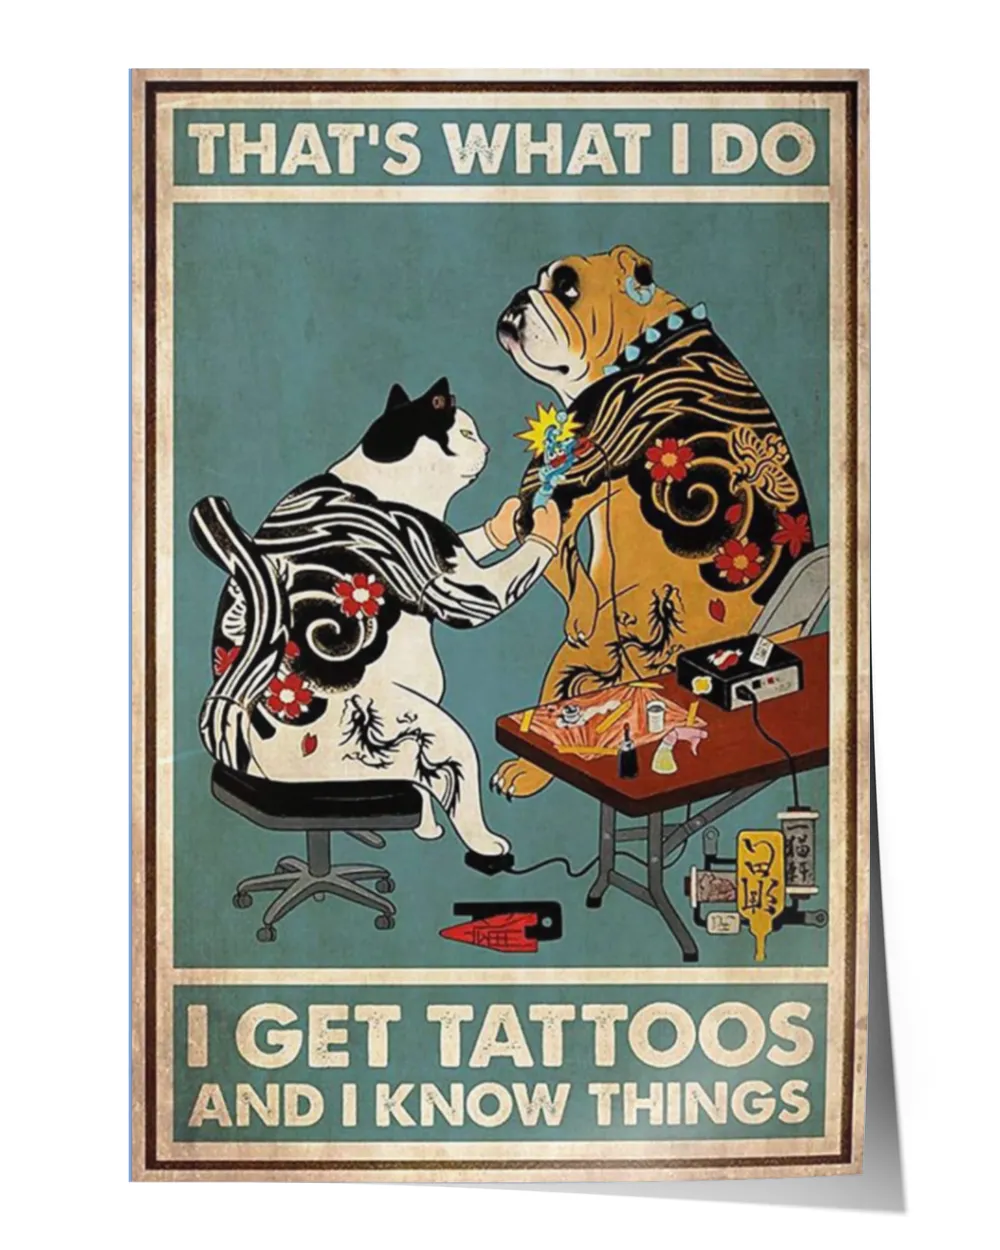 That's what i do i get tattoos and i know things